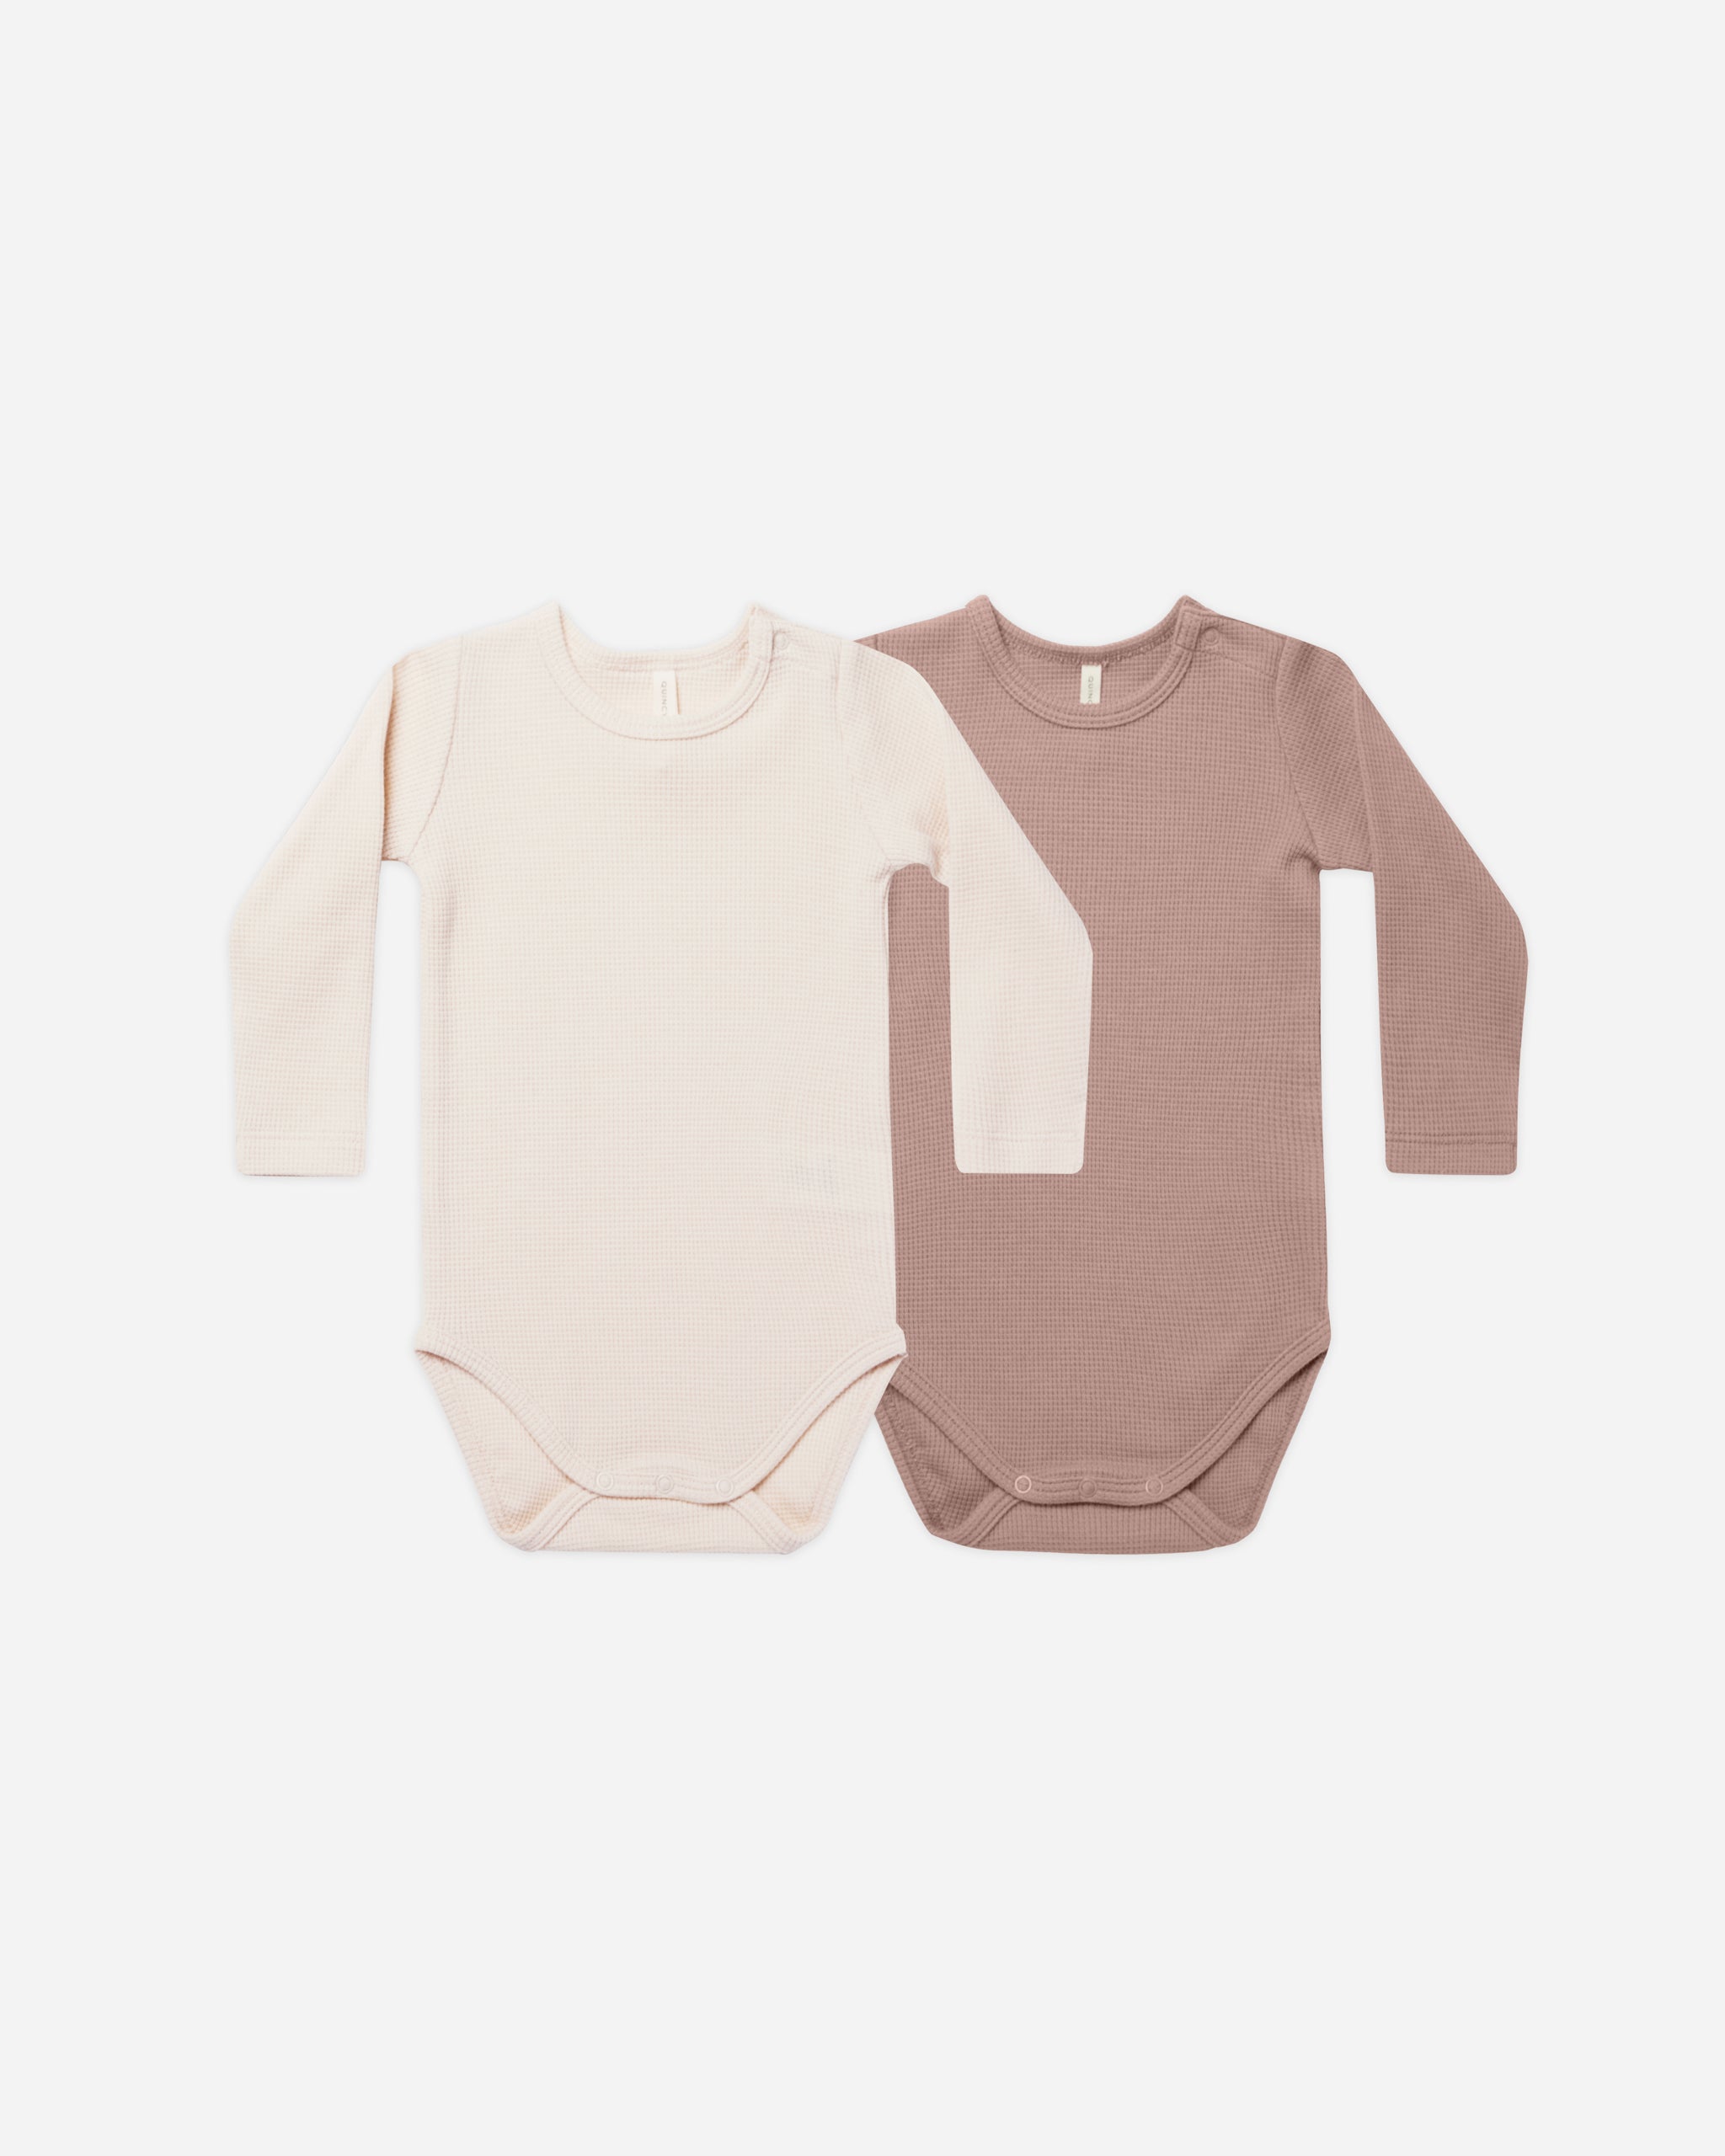 Waffle Bodysuit, 2 Pack || Natural, Mauve - Rylee + Cru | Kids Clothes | Trendy Baby Clothes | Modern Infant Outfits |